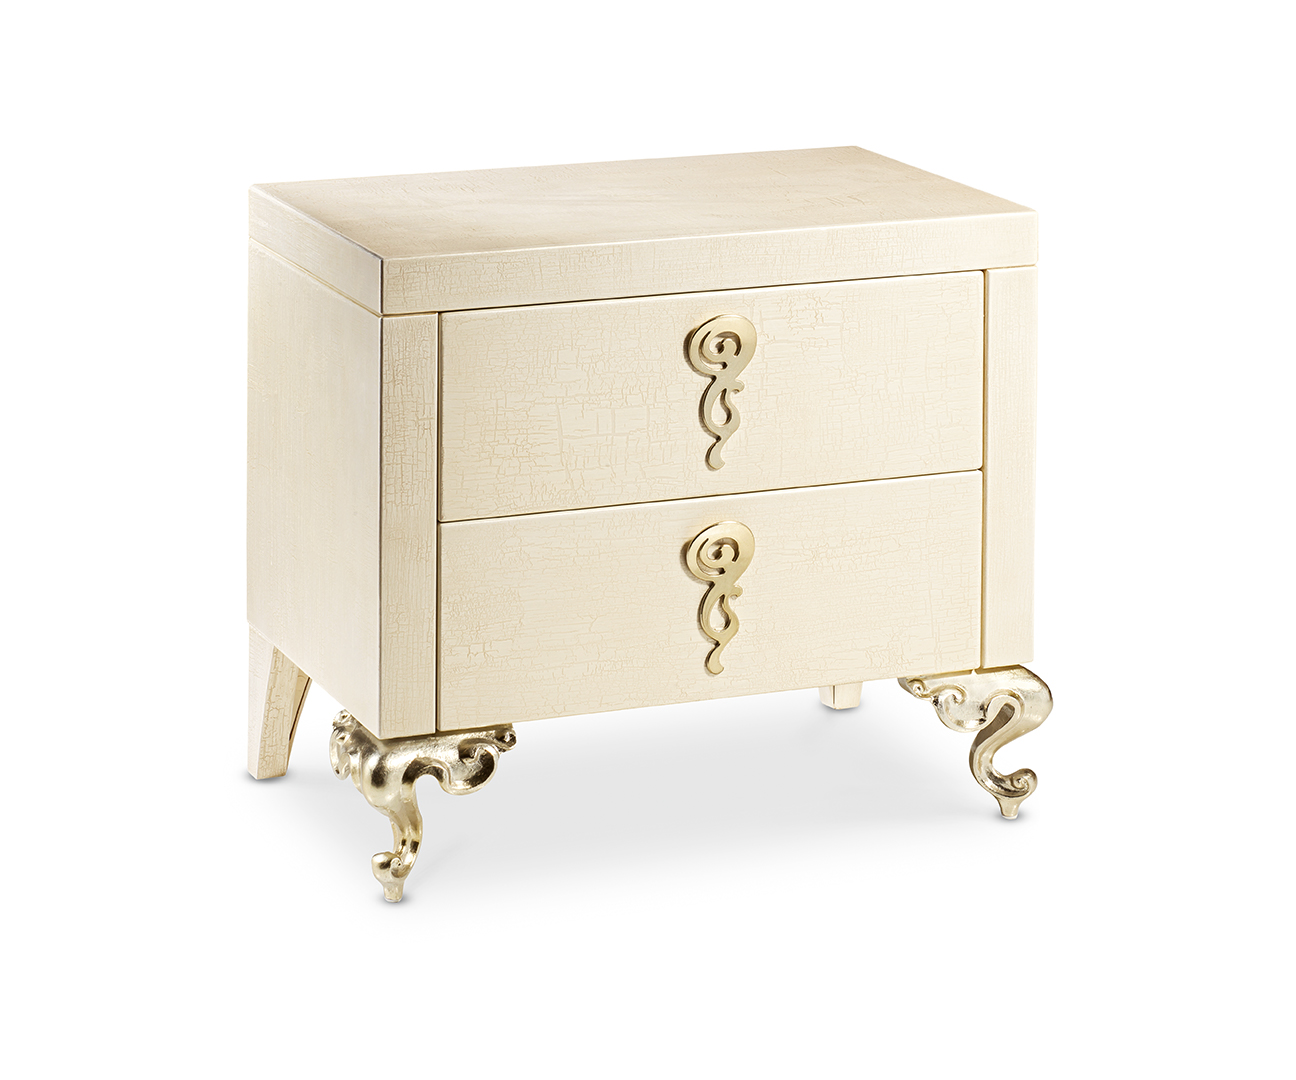 George bedside table - Cantori